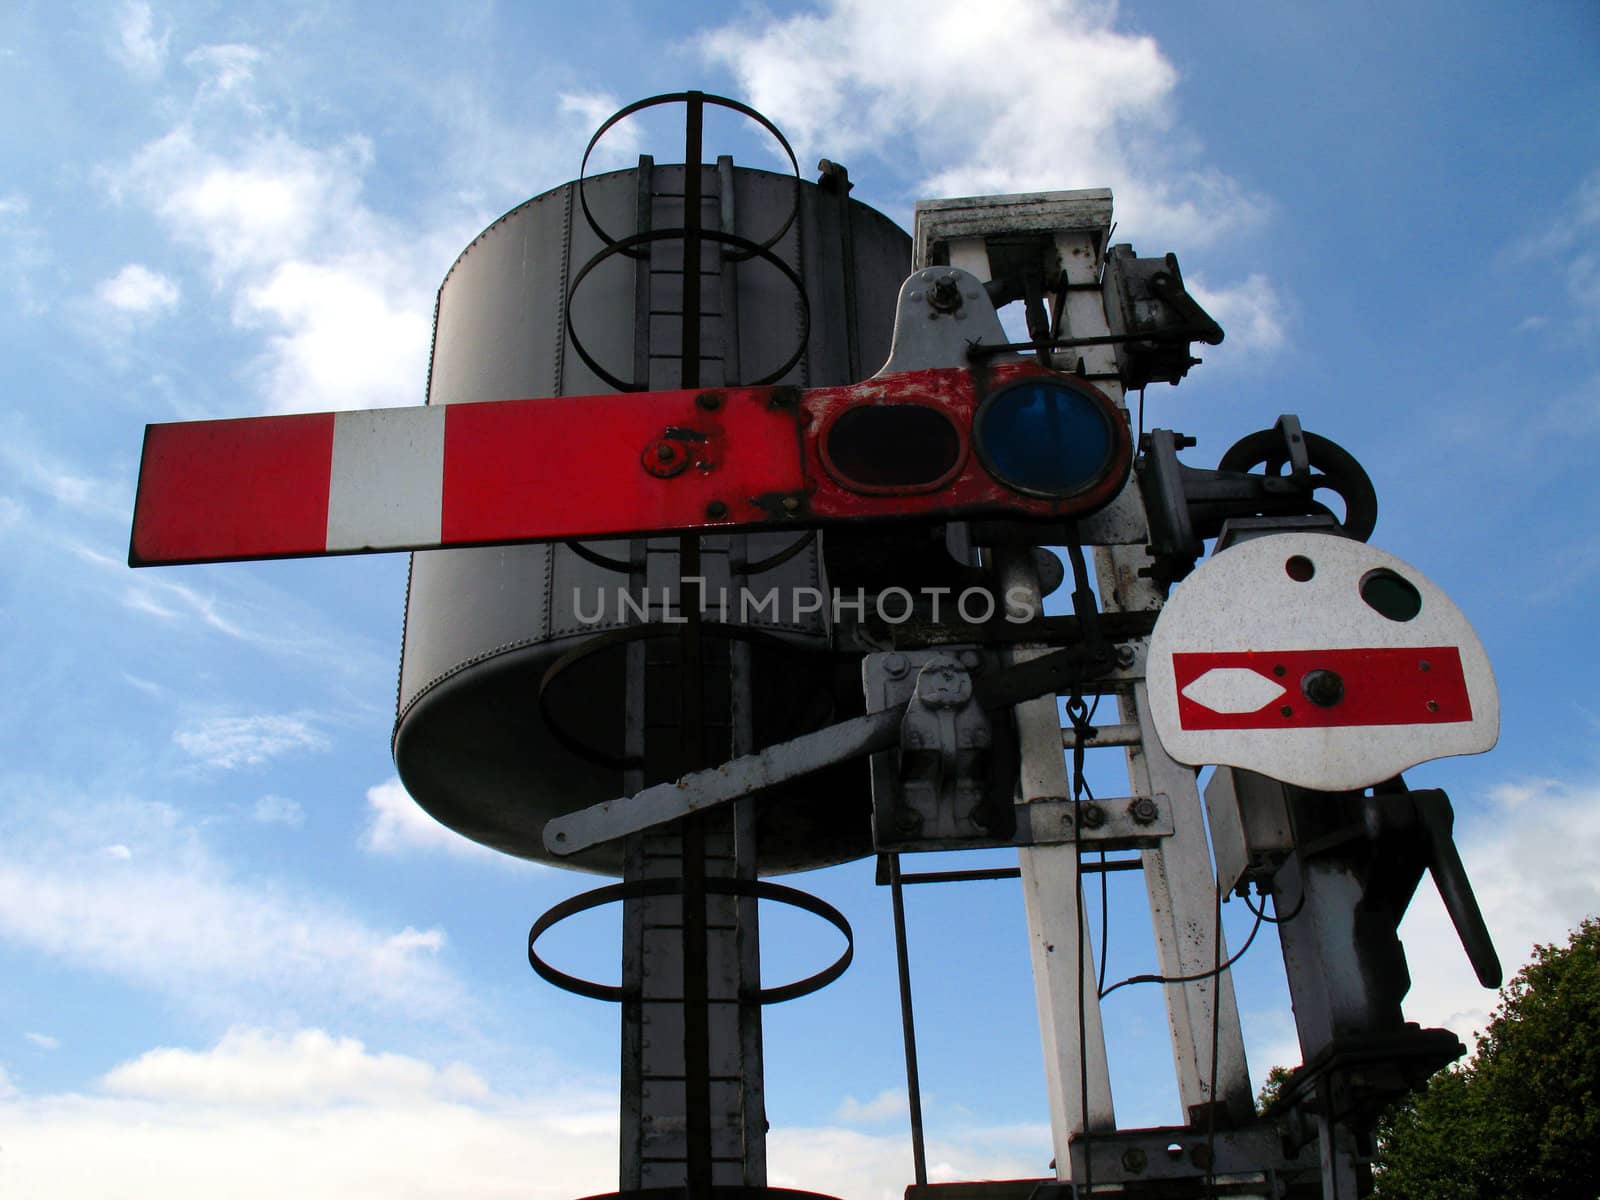 Railway semaphore signal by tommroch